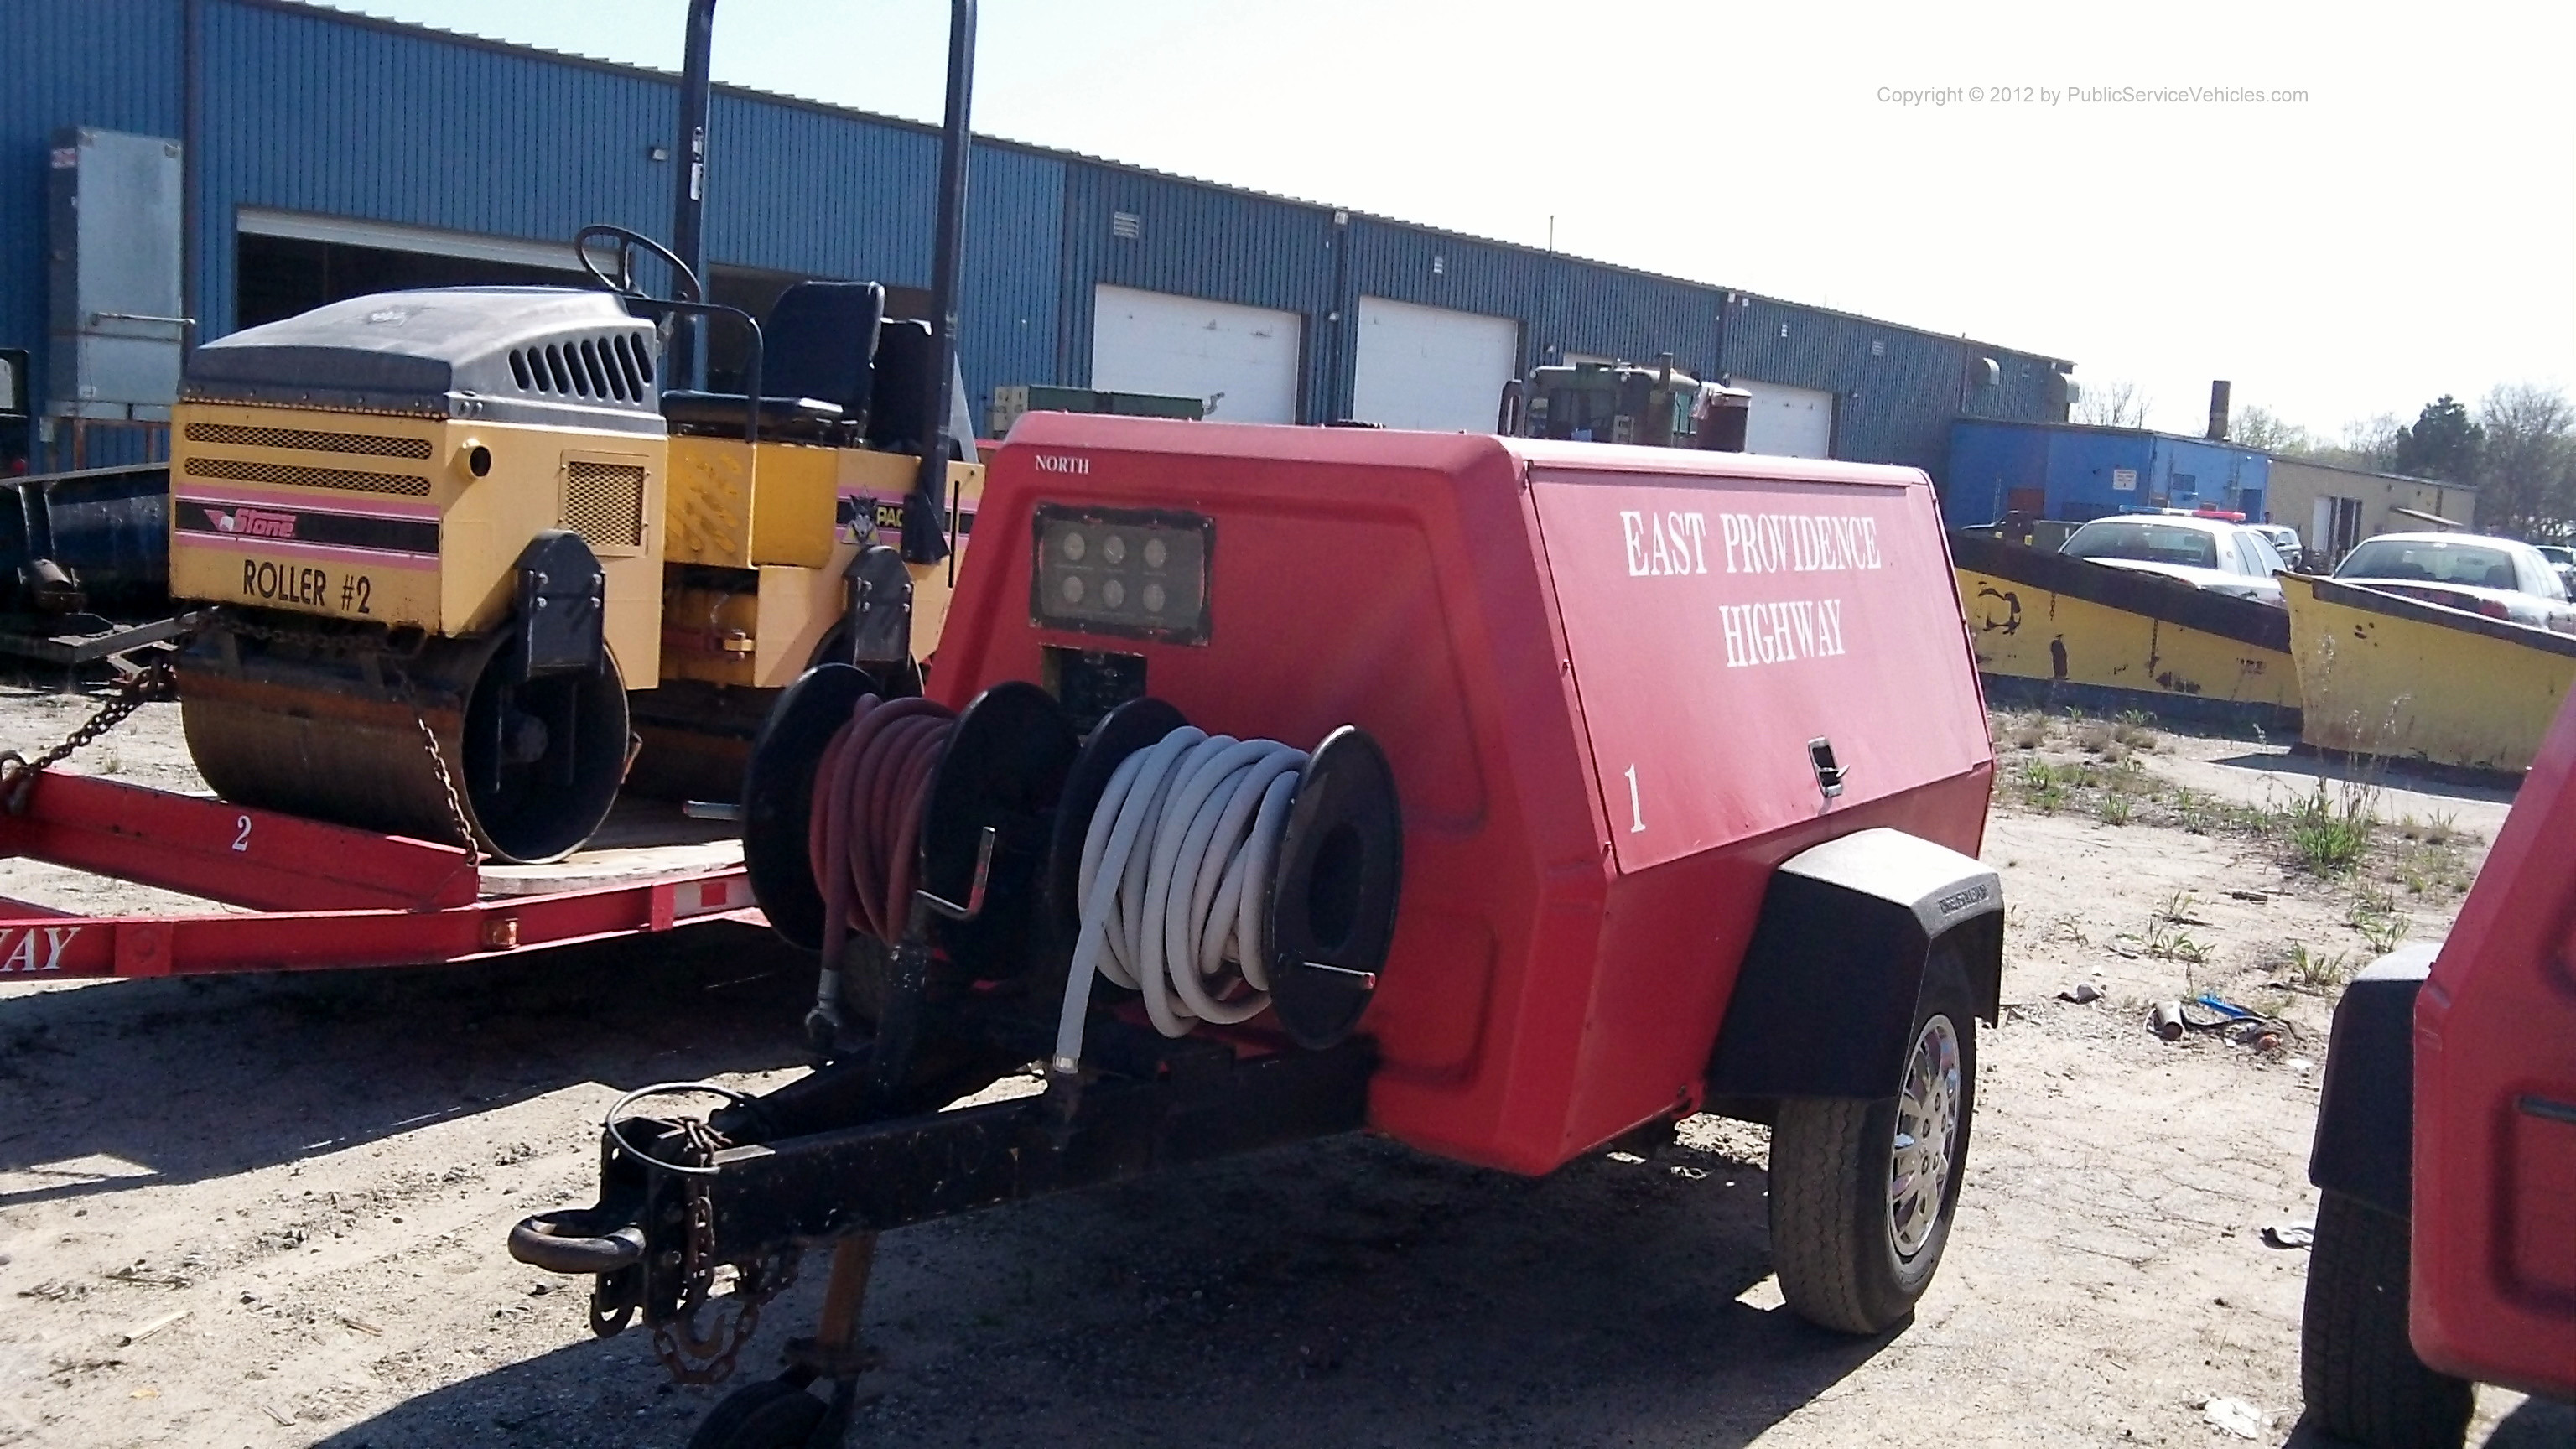 A photo  of East Providence Highway Division
            Air Compressor 1196, a 1990-2010 Air Compressor             taken by Kieran Egan